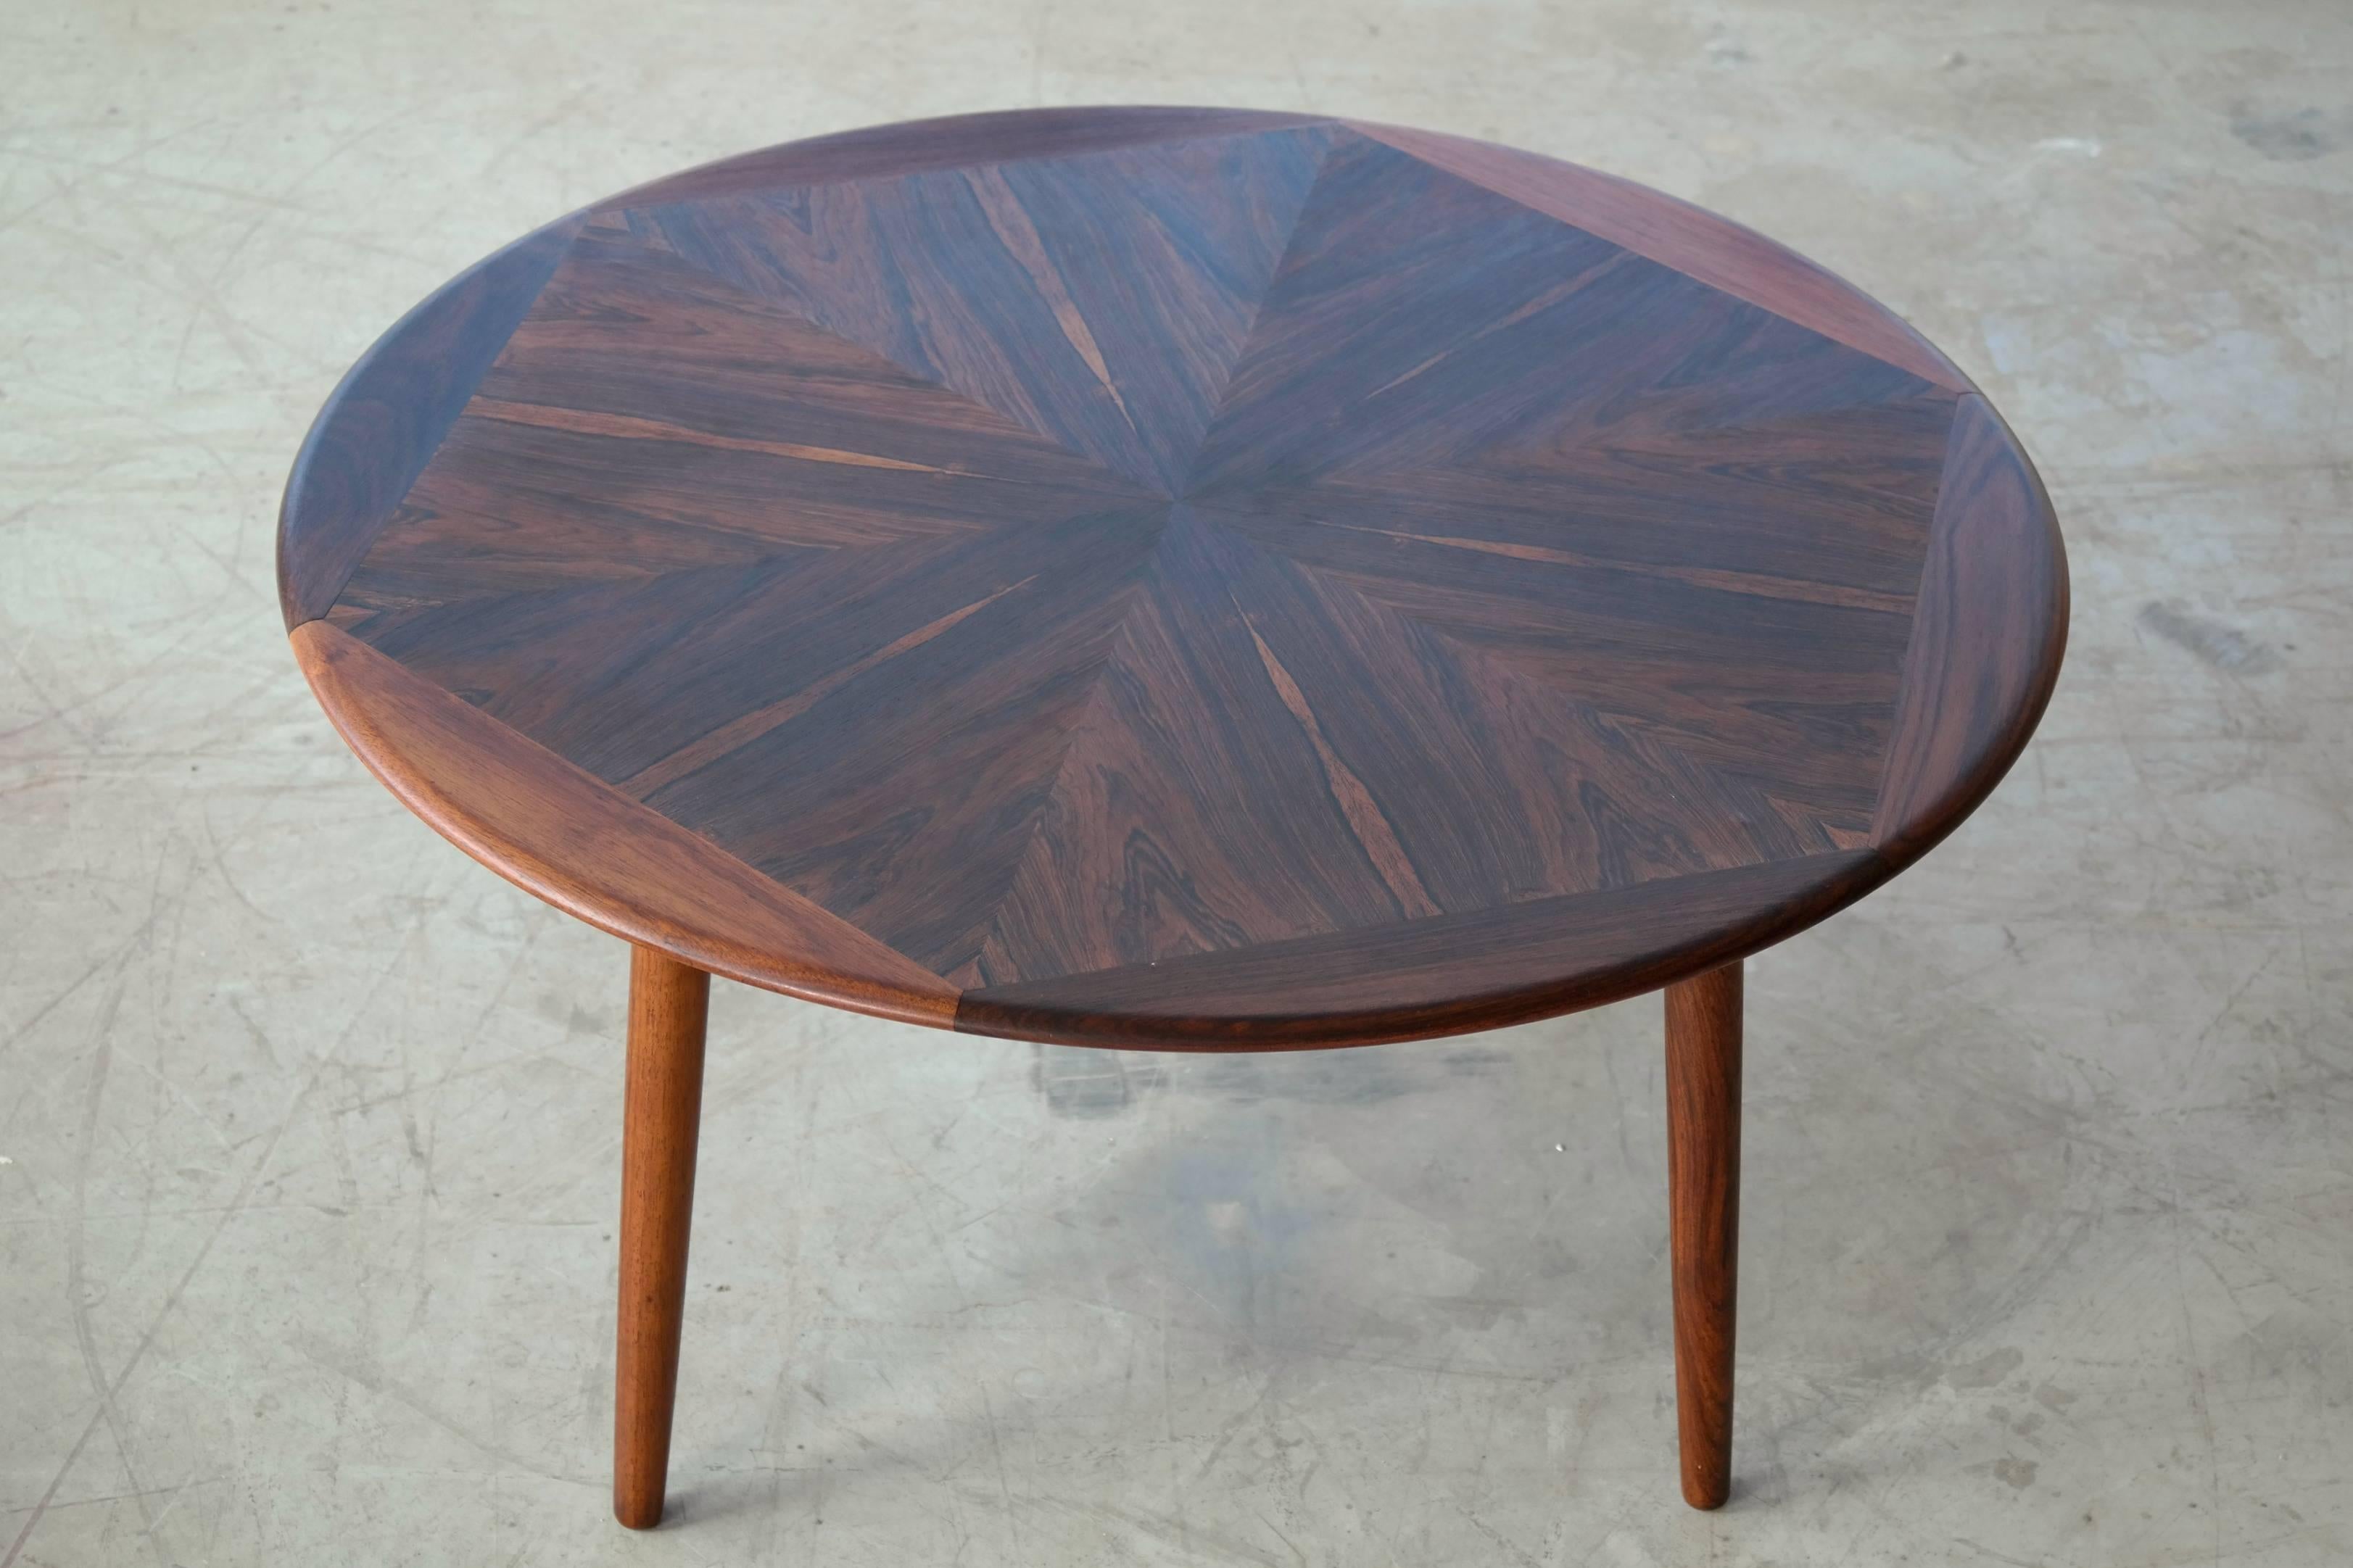 Beautiful round coffee table in book matched rosewood veneer by H.W. Klein for Bramin Mobler, Denmark.